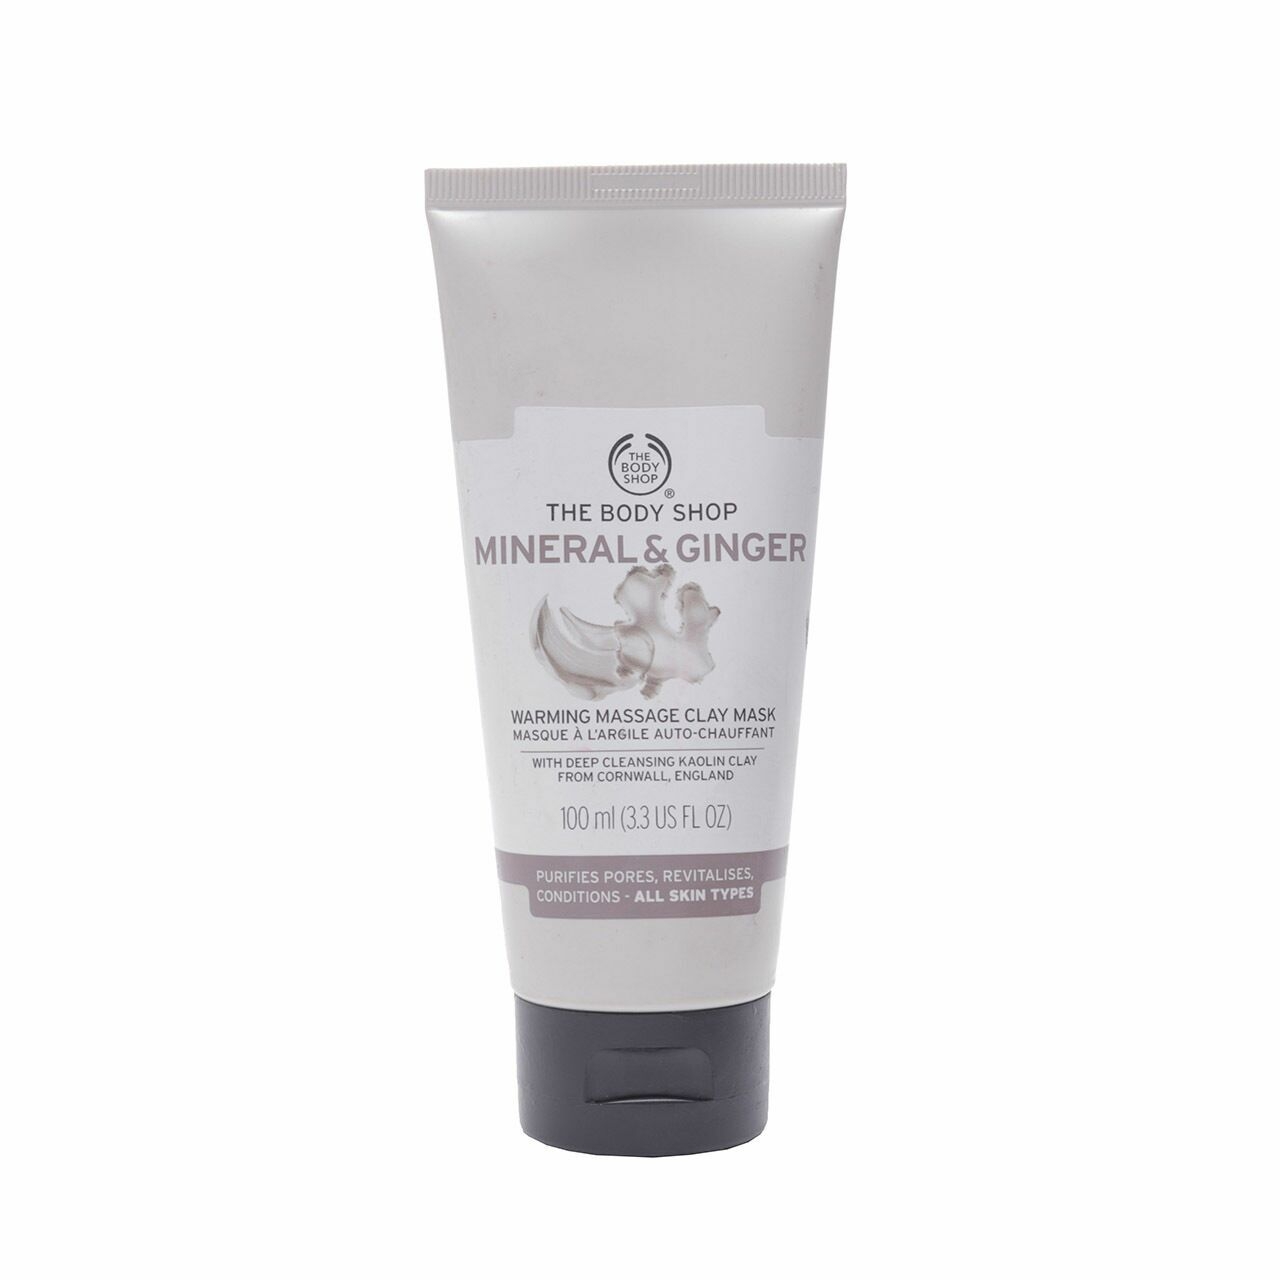 The Body Shop Mineral & Ginger Clay Mask Skin Care